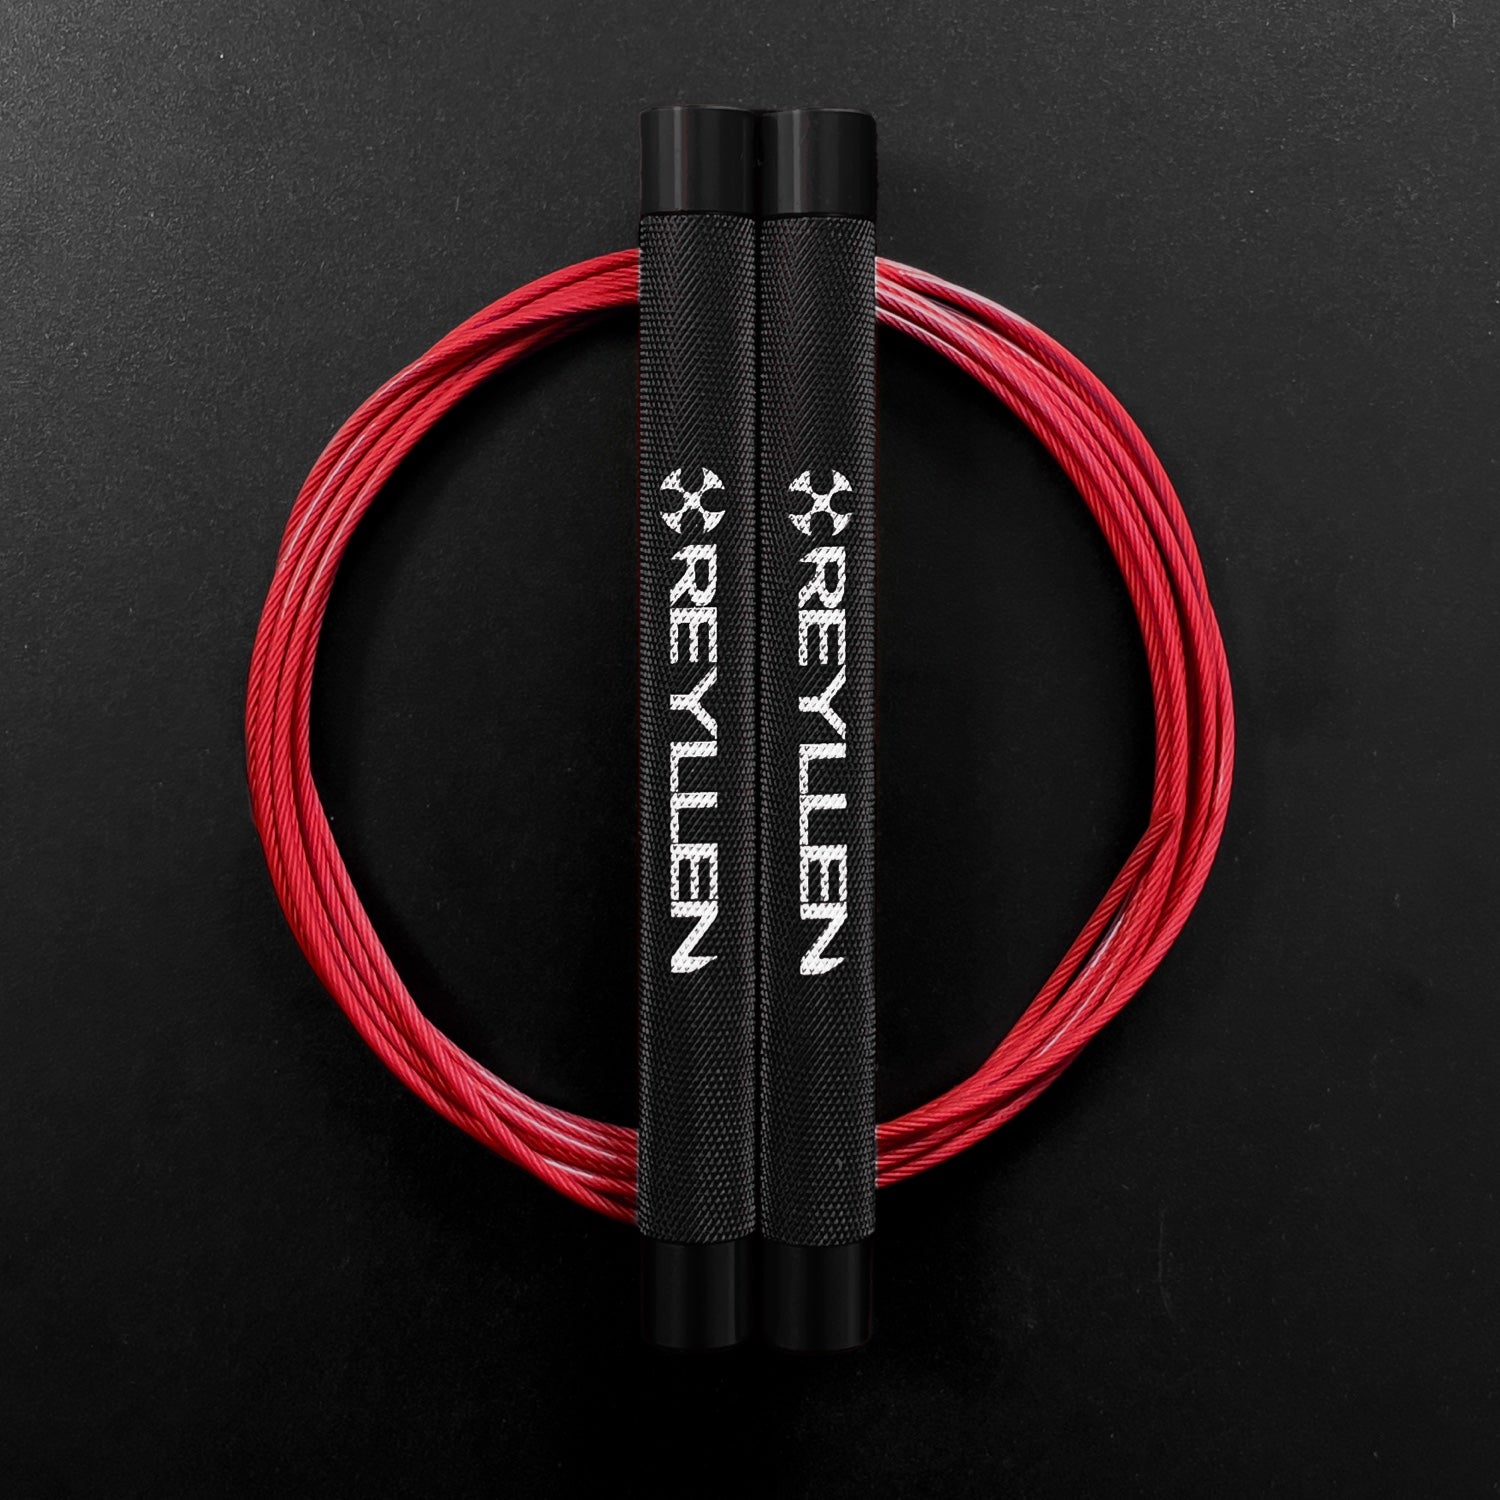 Reyllen Flare Mx Speed Skipping Jump Rope - Aluminium Handles - black with red nylon coated cable